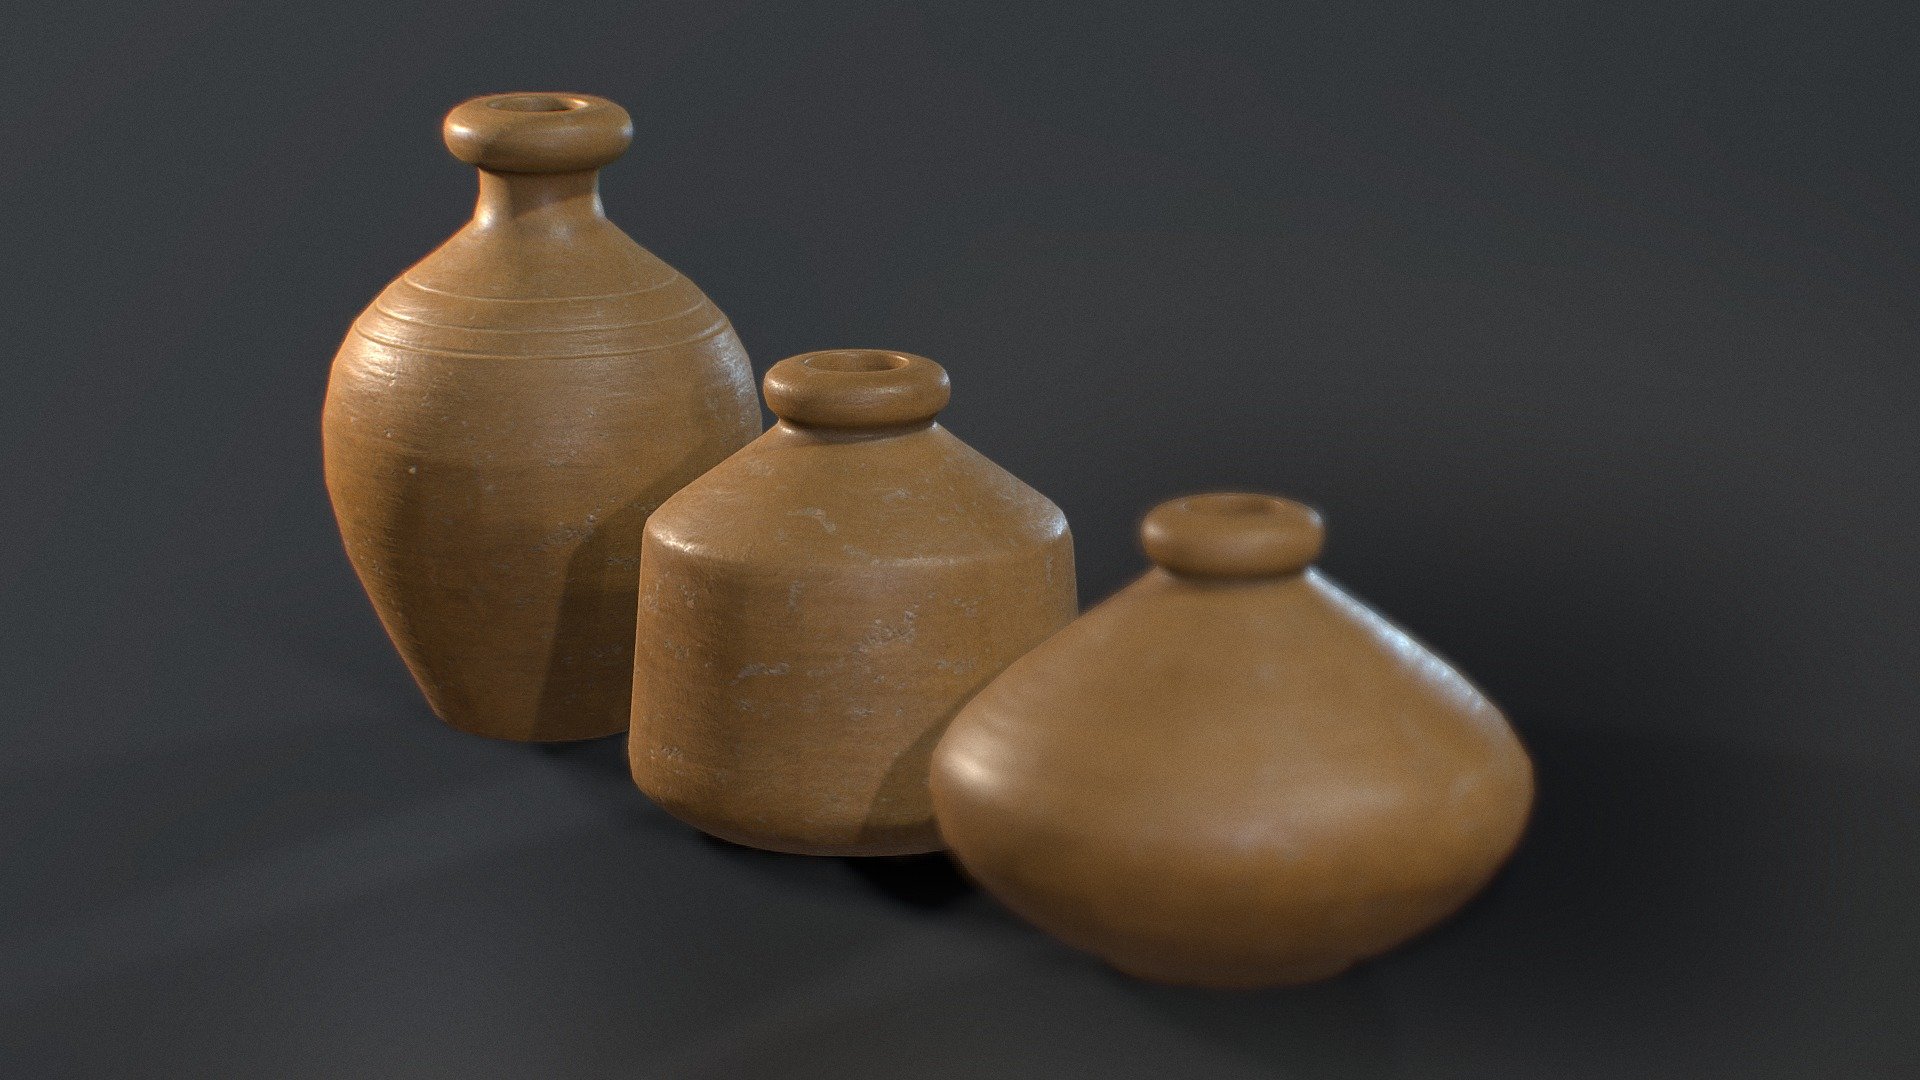 This is a 3d model of clay Pots for using as water container. It is can be used as assets for games other store markets renders.

This model is created in 3ds Max and textured in Substance Painter.

This model is made in real proportions.

High quality of textures are available to download.

Maps include - Base Color, Normal, AO and Roughness Textures 3d model